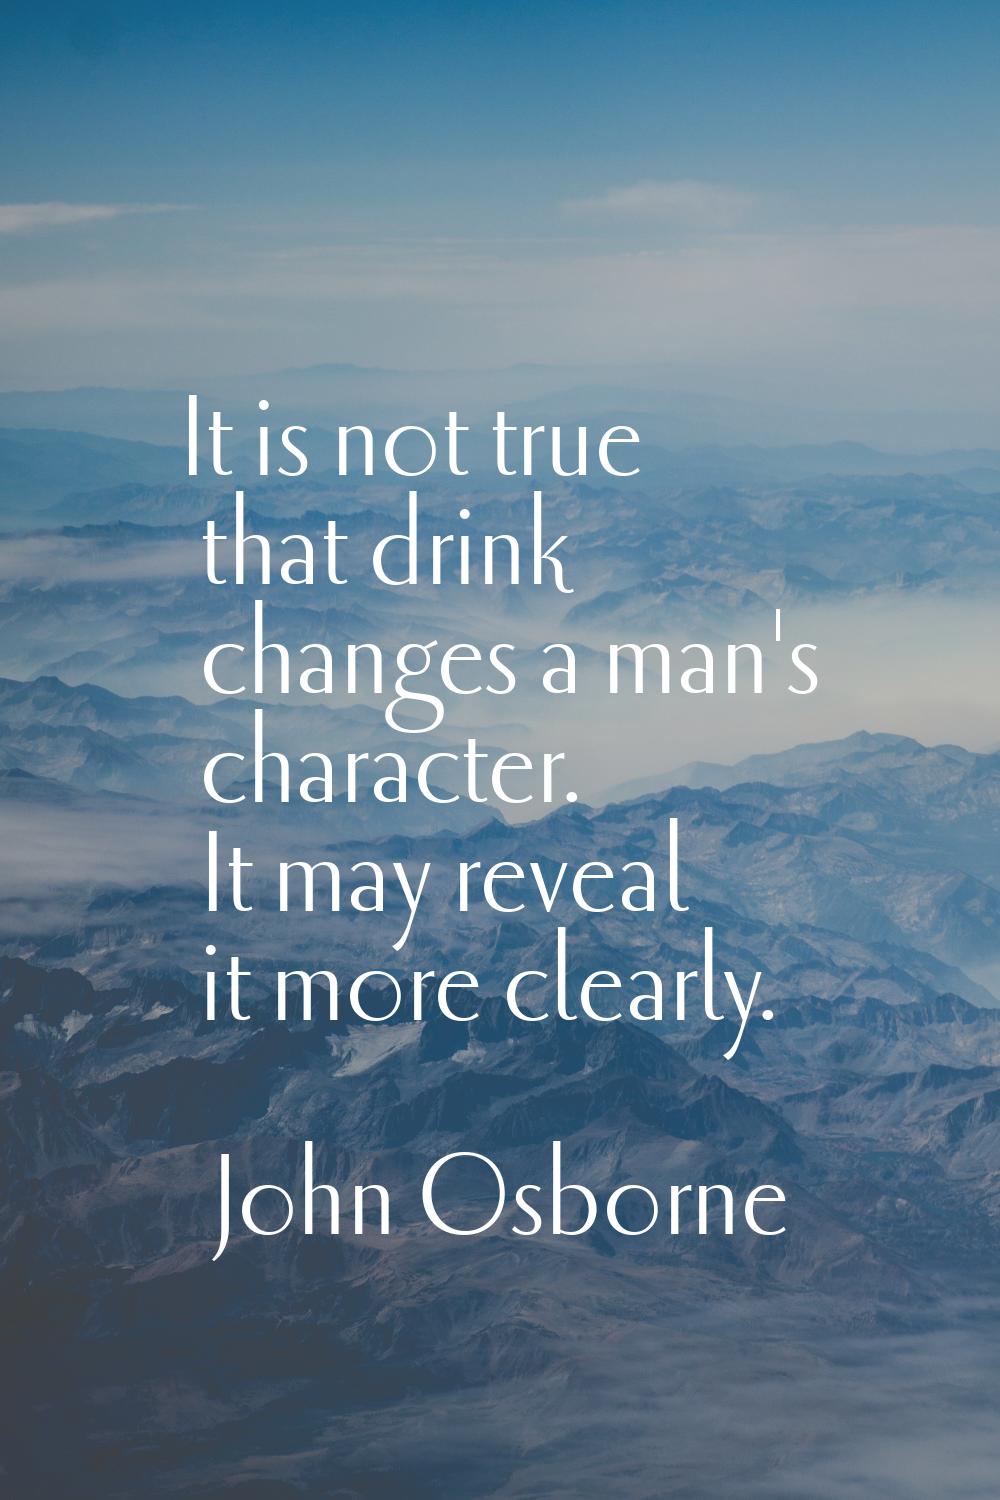 It is not true that drink changes a man's character. It may reveal it more clearly.